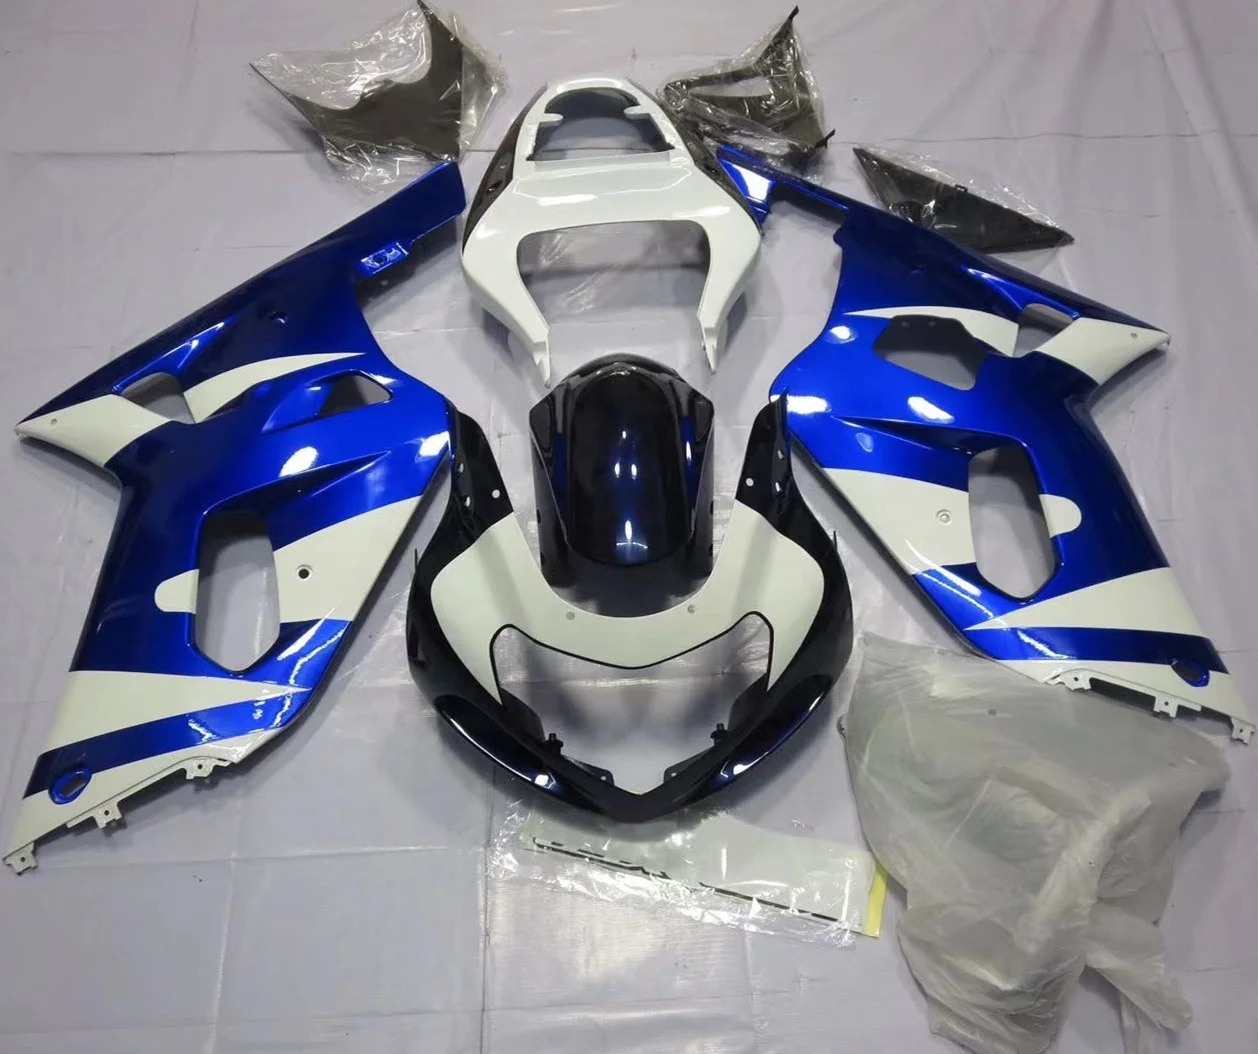 

2022 WHSC Blue And Black White Fairing Kits For SUZUKI GSXR600-750 2001-2003 Motorcycle Parts, Pictures shown